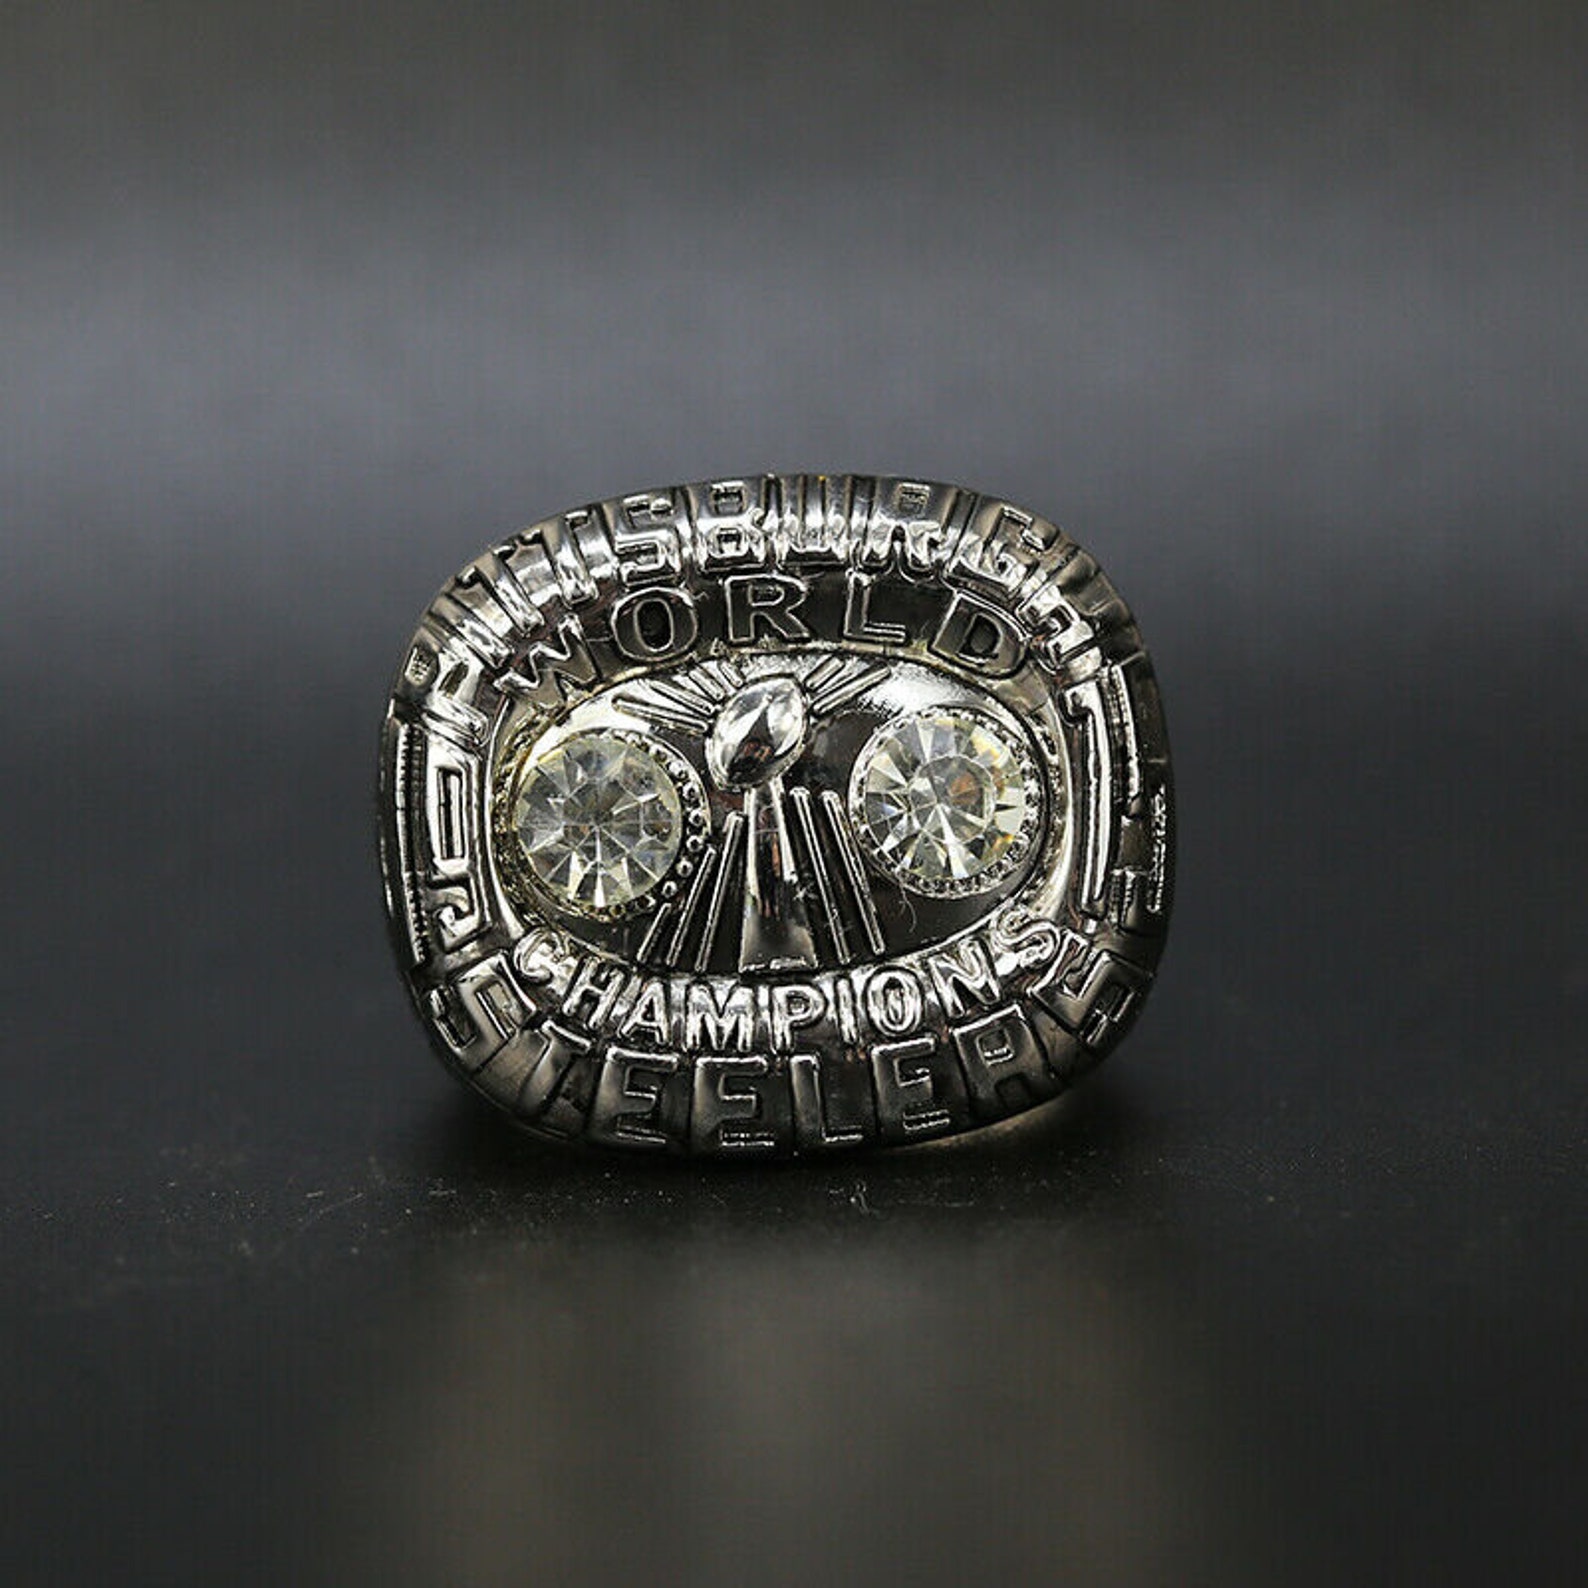 Pittsburgh Steelers 6 Championship rings silver Ben | Etsy